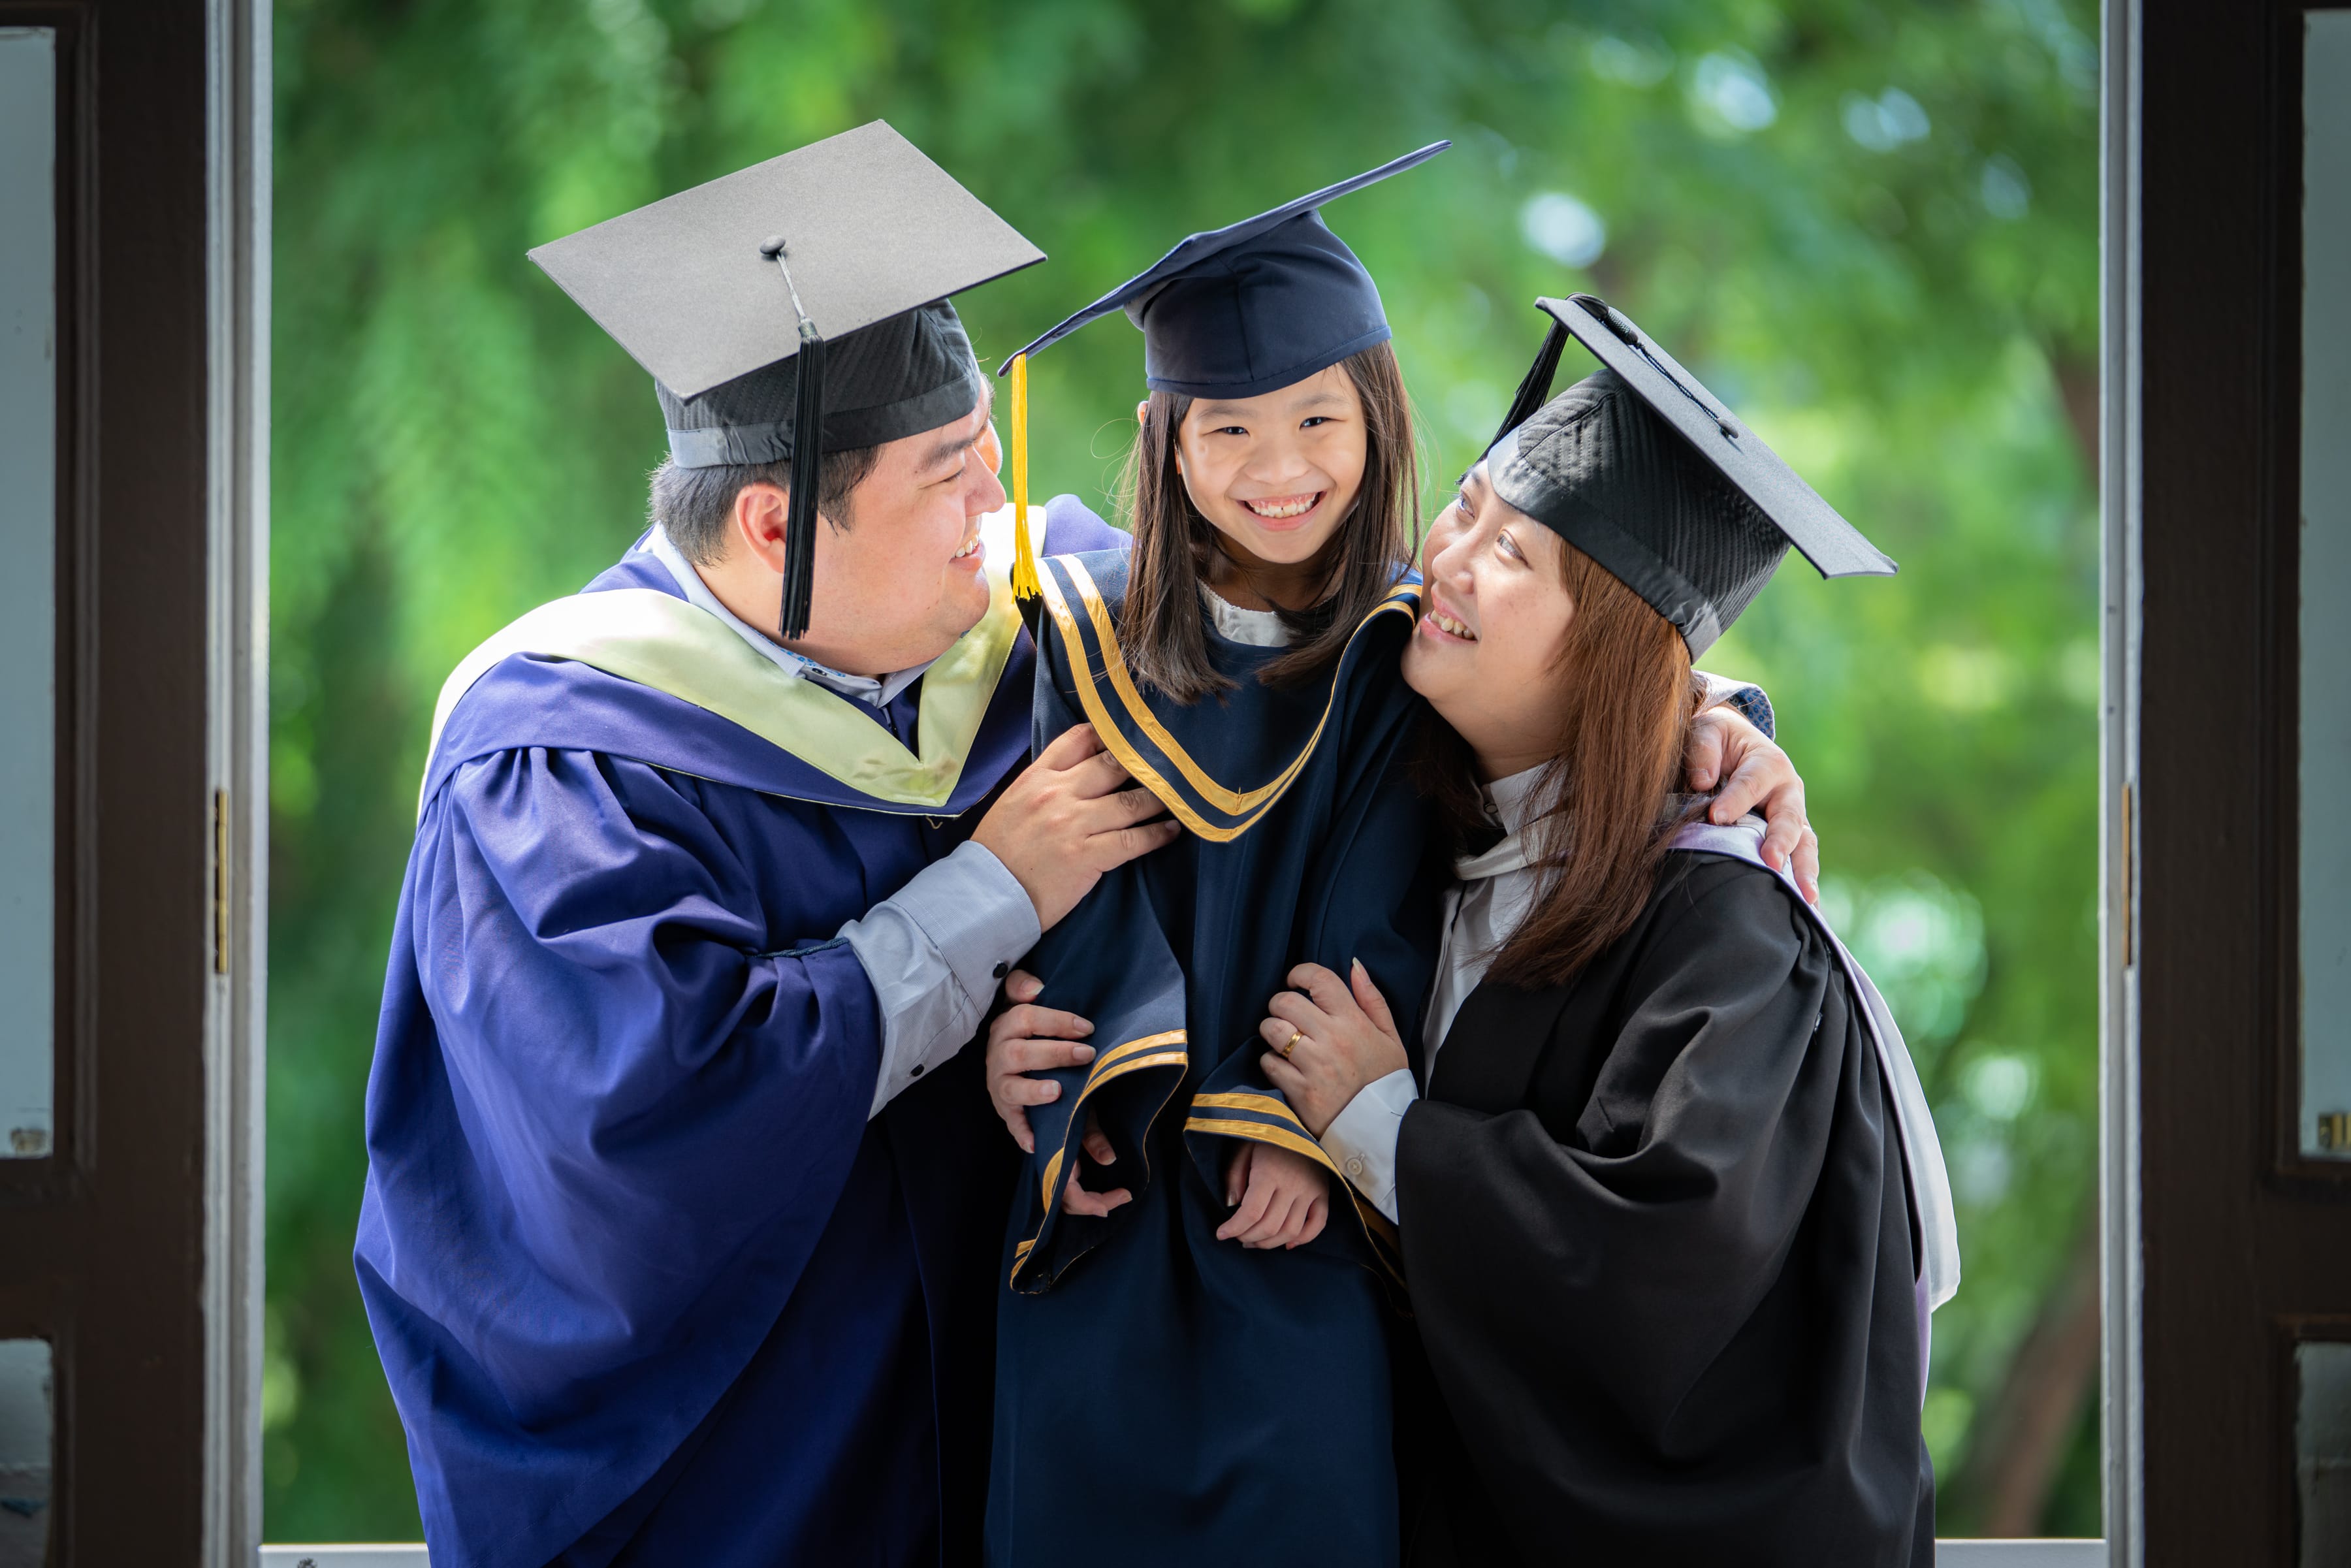 Smiling Father and Mother in university graduation gown carrying daughter in K2 kindergarten graduation gown and cap with nature scenery background during a k2 kindergarten graduation photoshoot in Singapore Credit: White Room Credit Studio